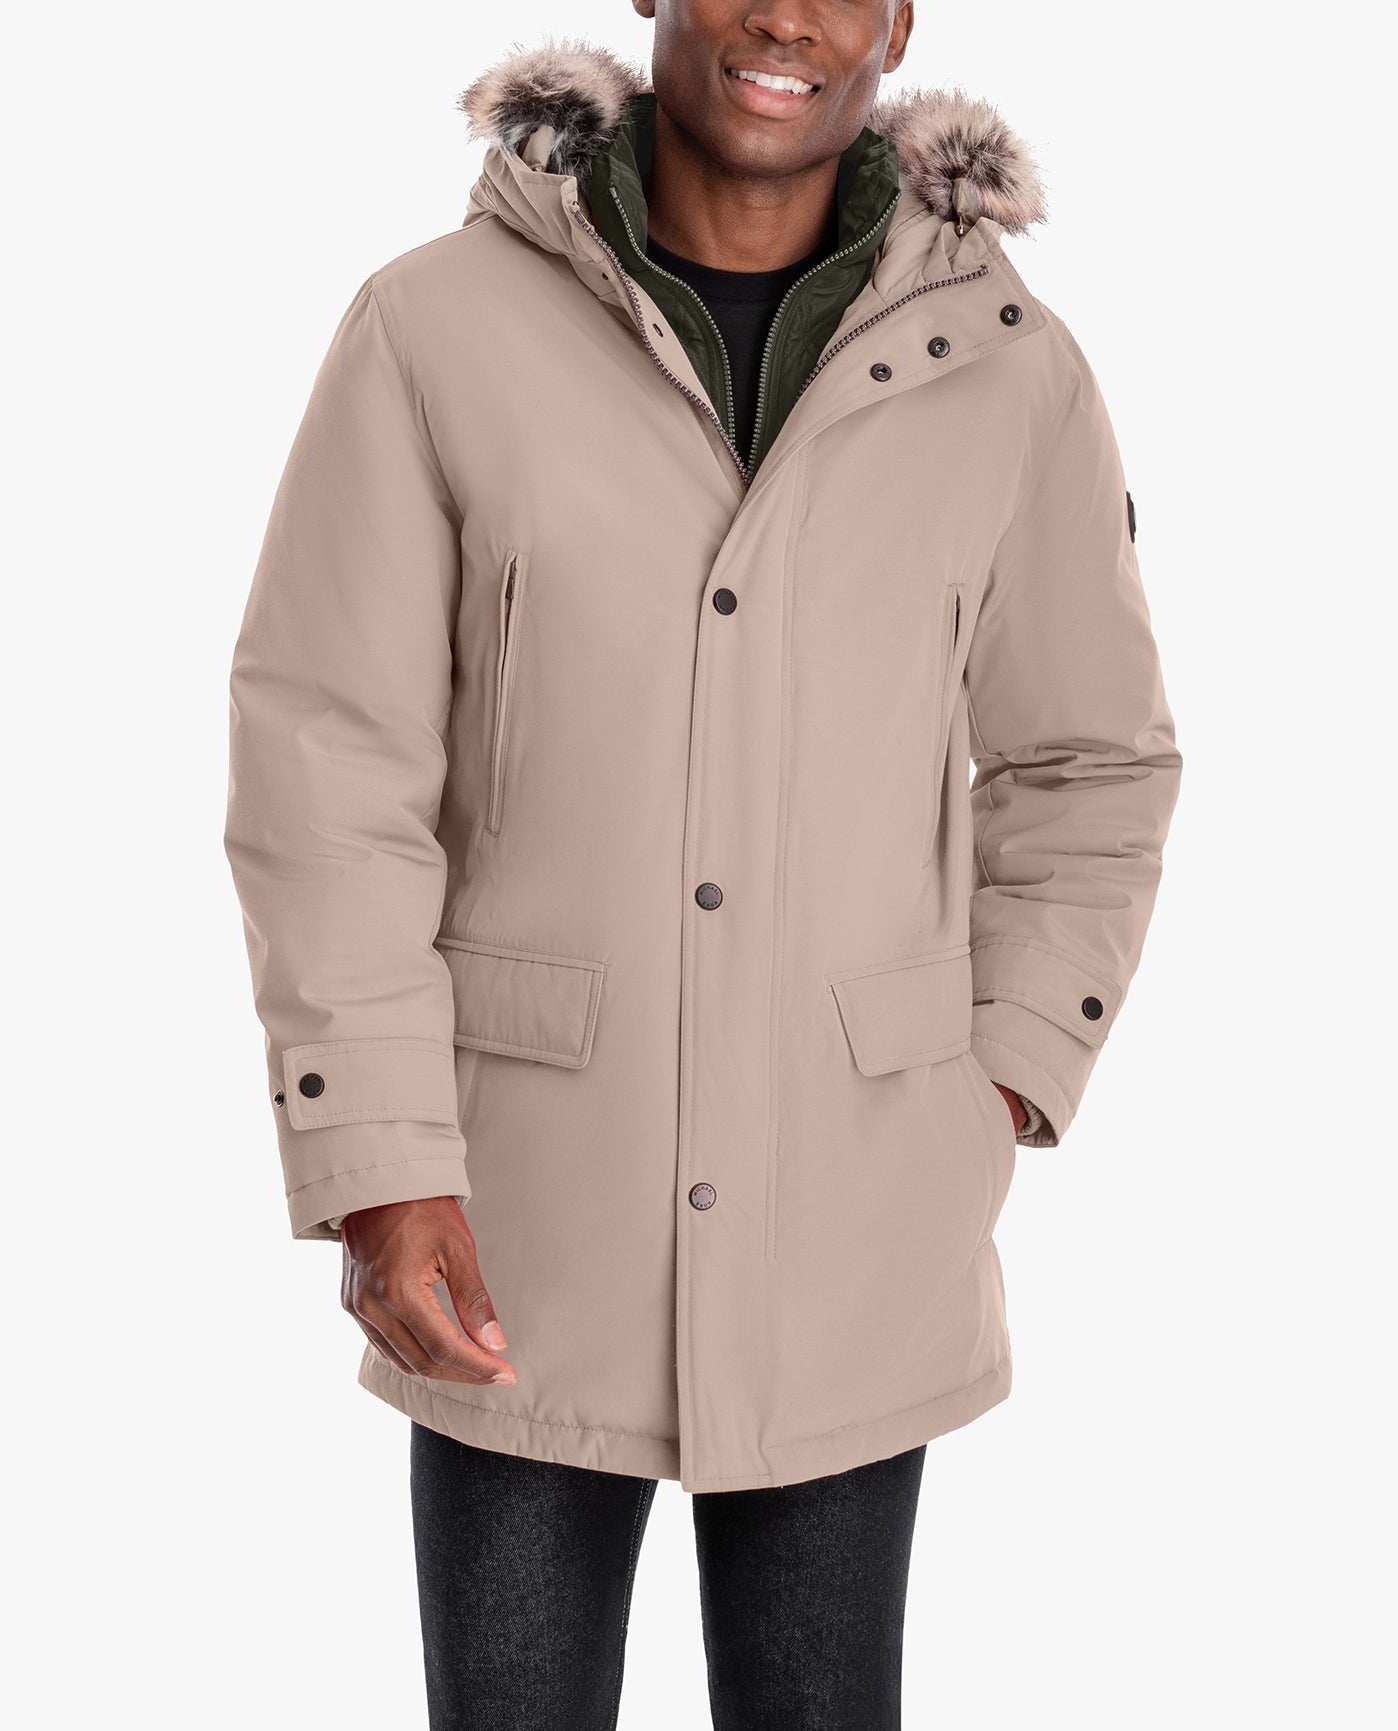 BACK VIEW OF ARTIC PARKA WITH REMOVABLE FAUX FUR TRIMMED HOOD | LF TAUPE